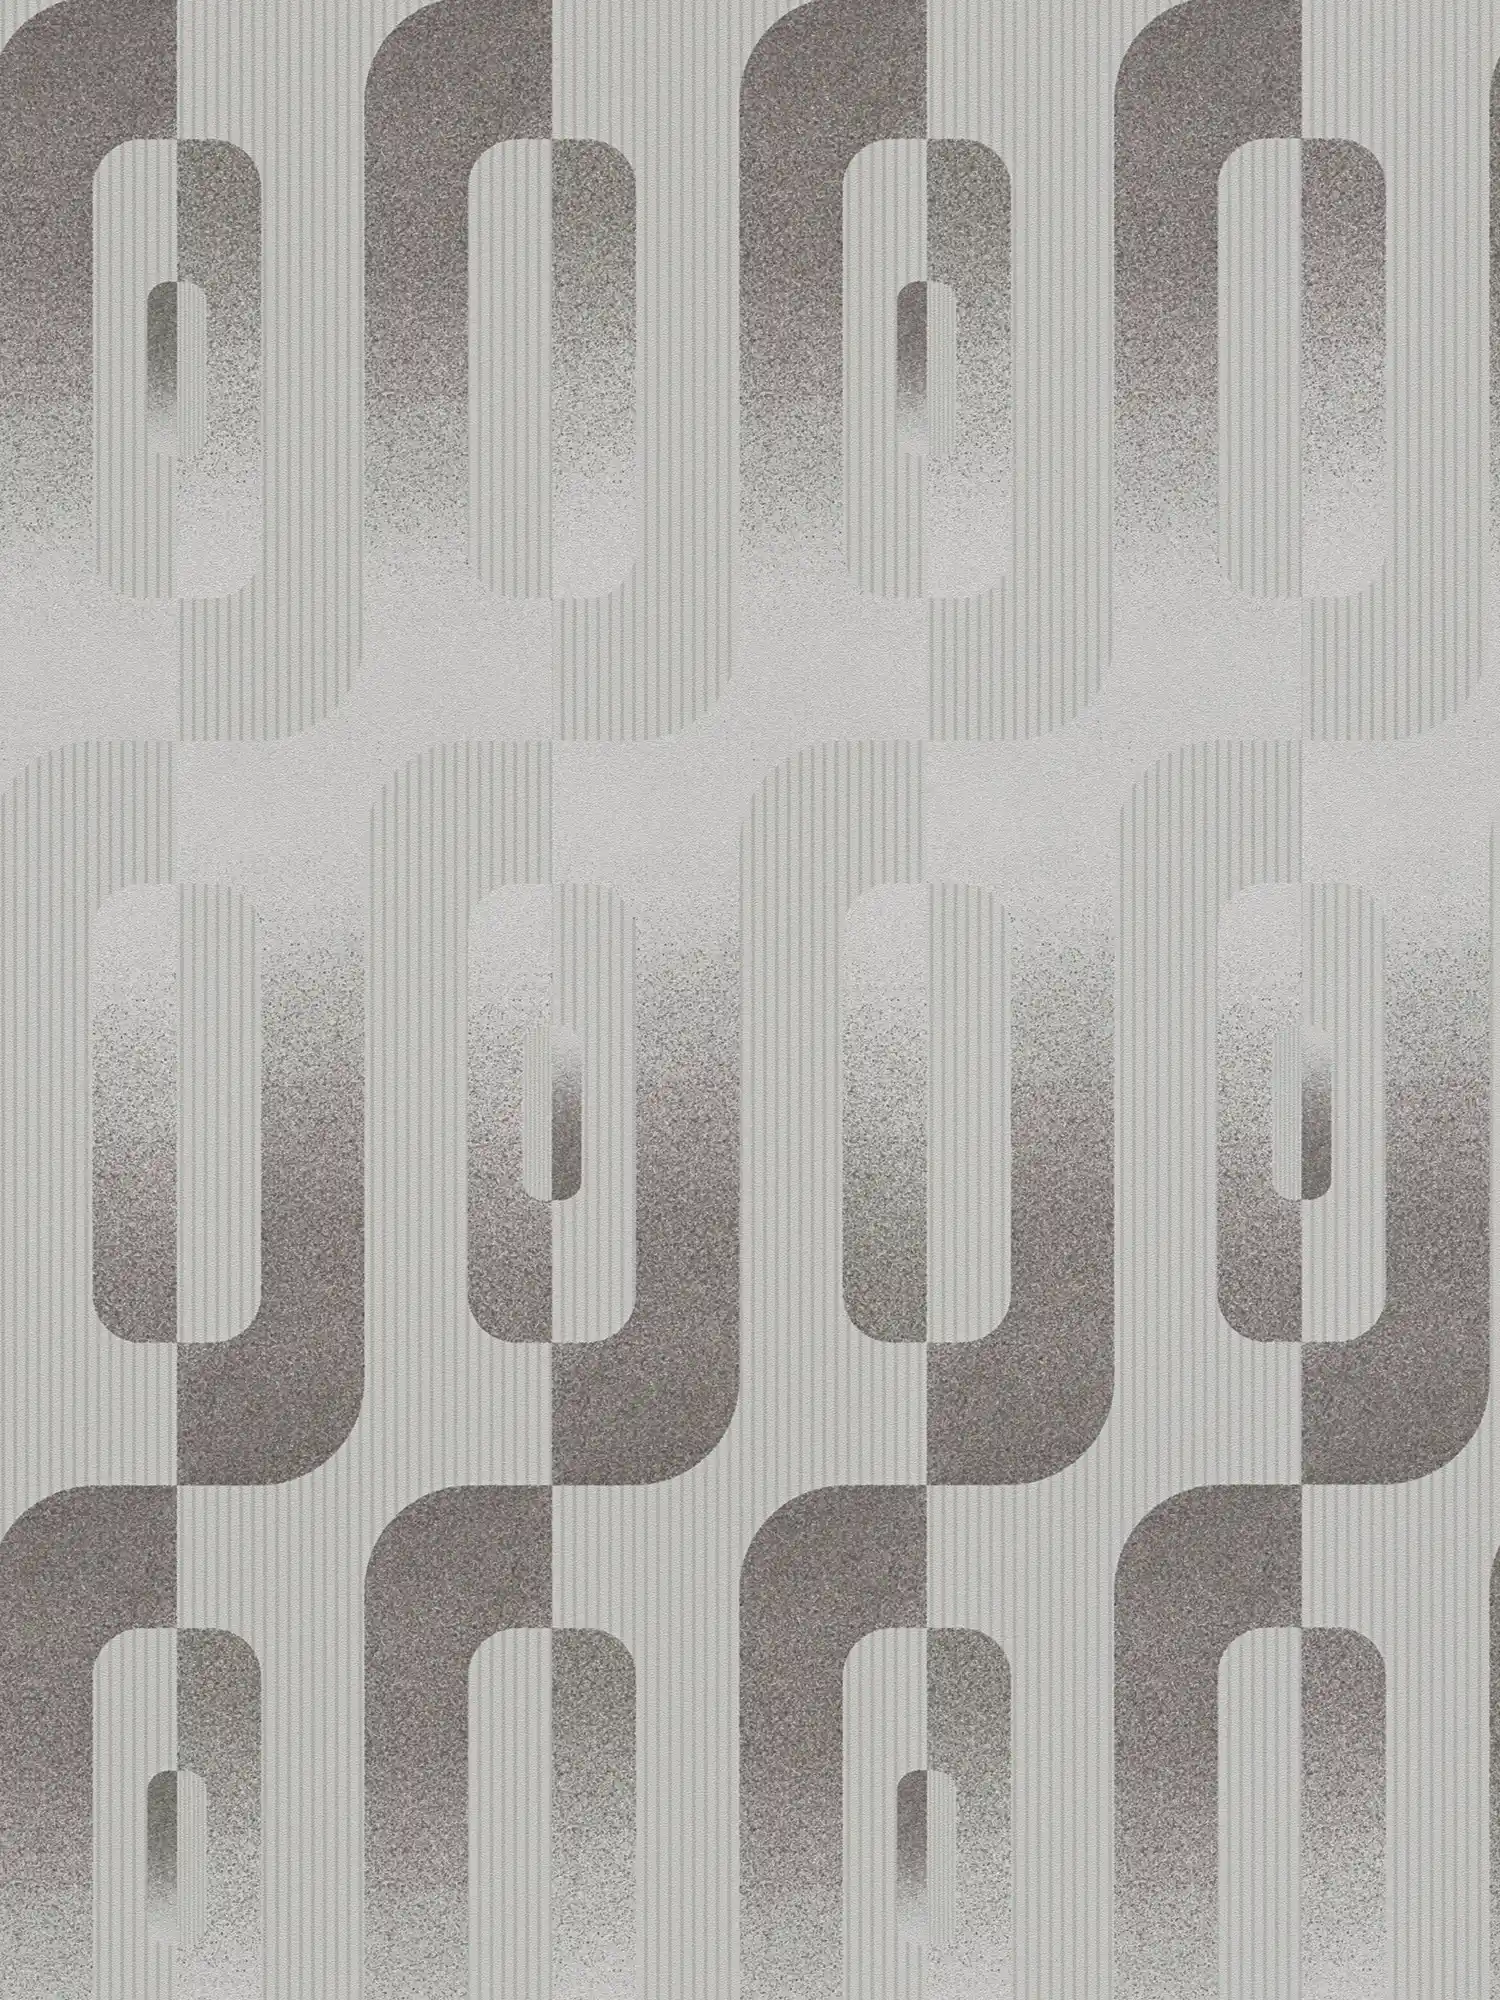 Graphic wallpaper with Reto pattern in grey and silver
